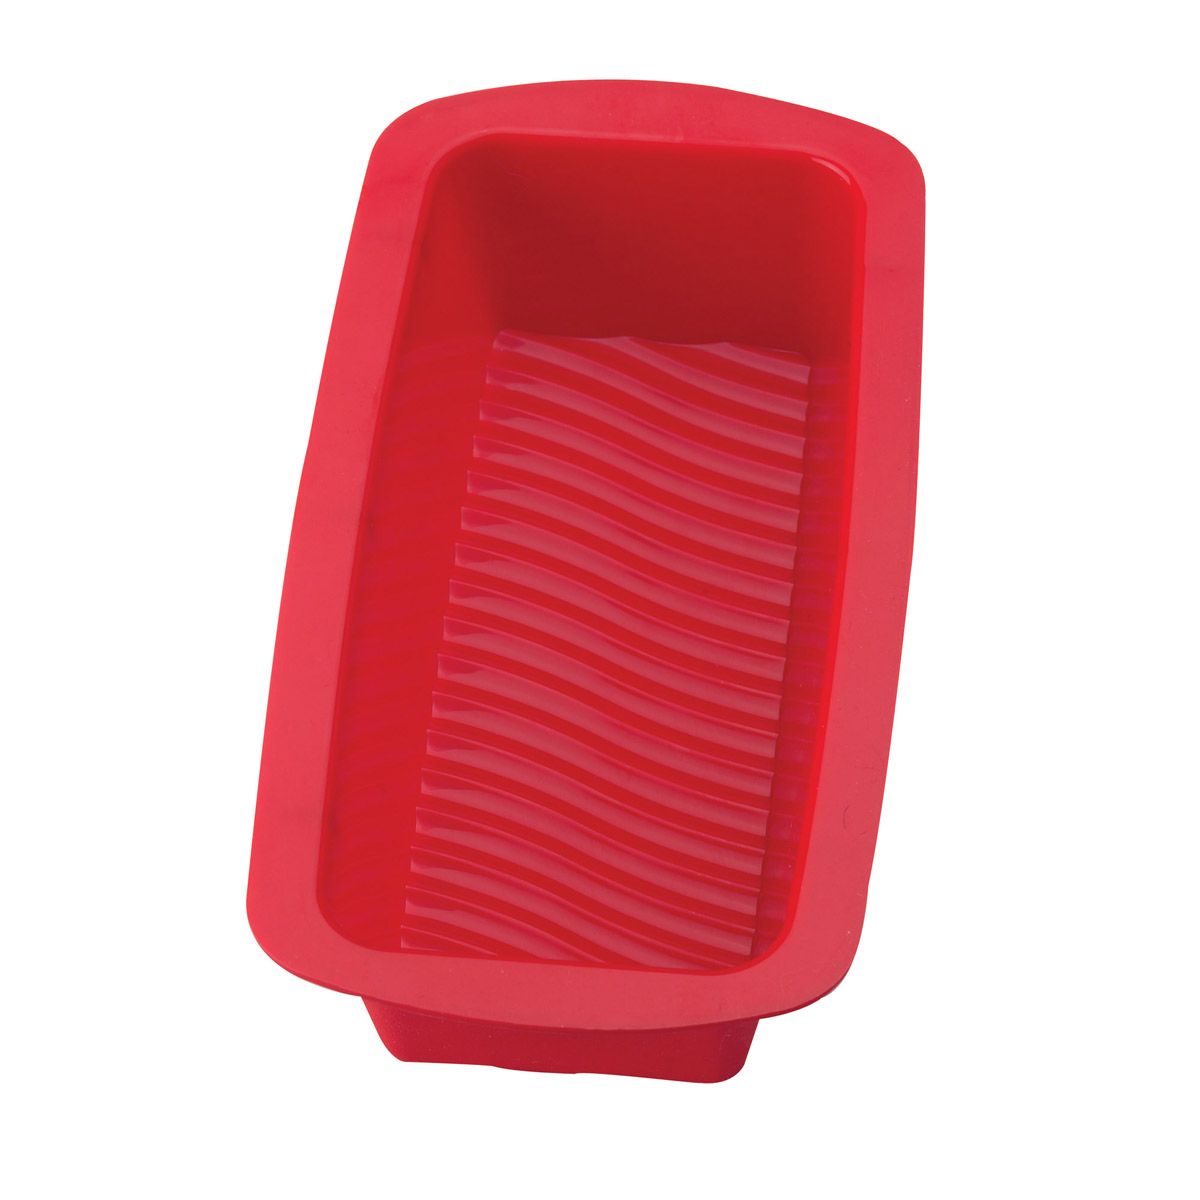 red silicone loaf pan.